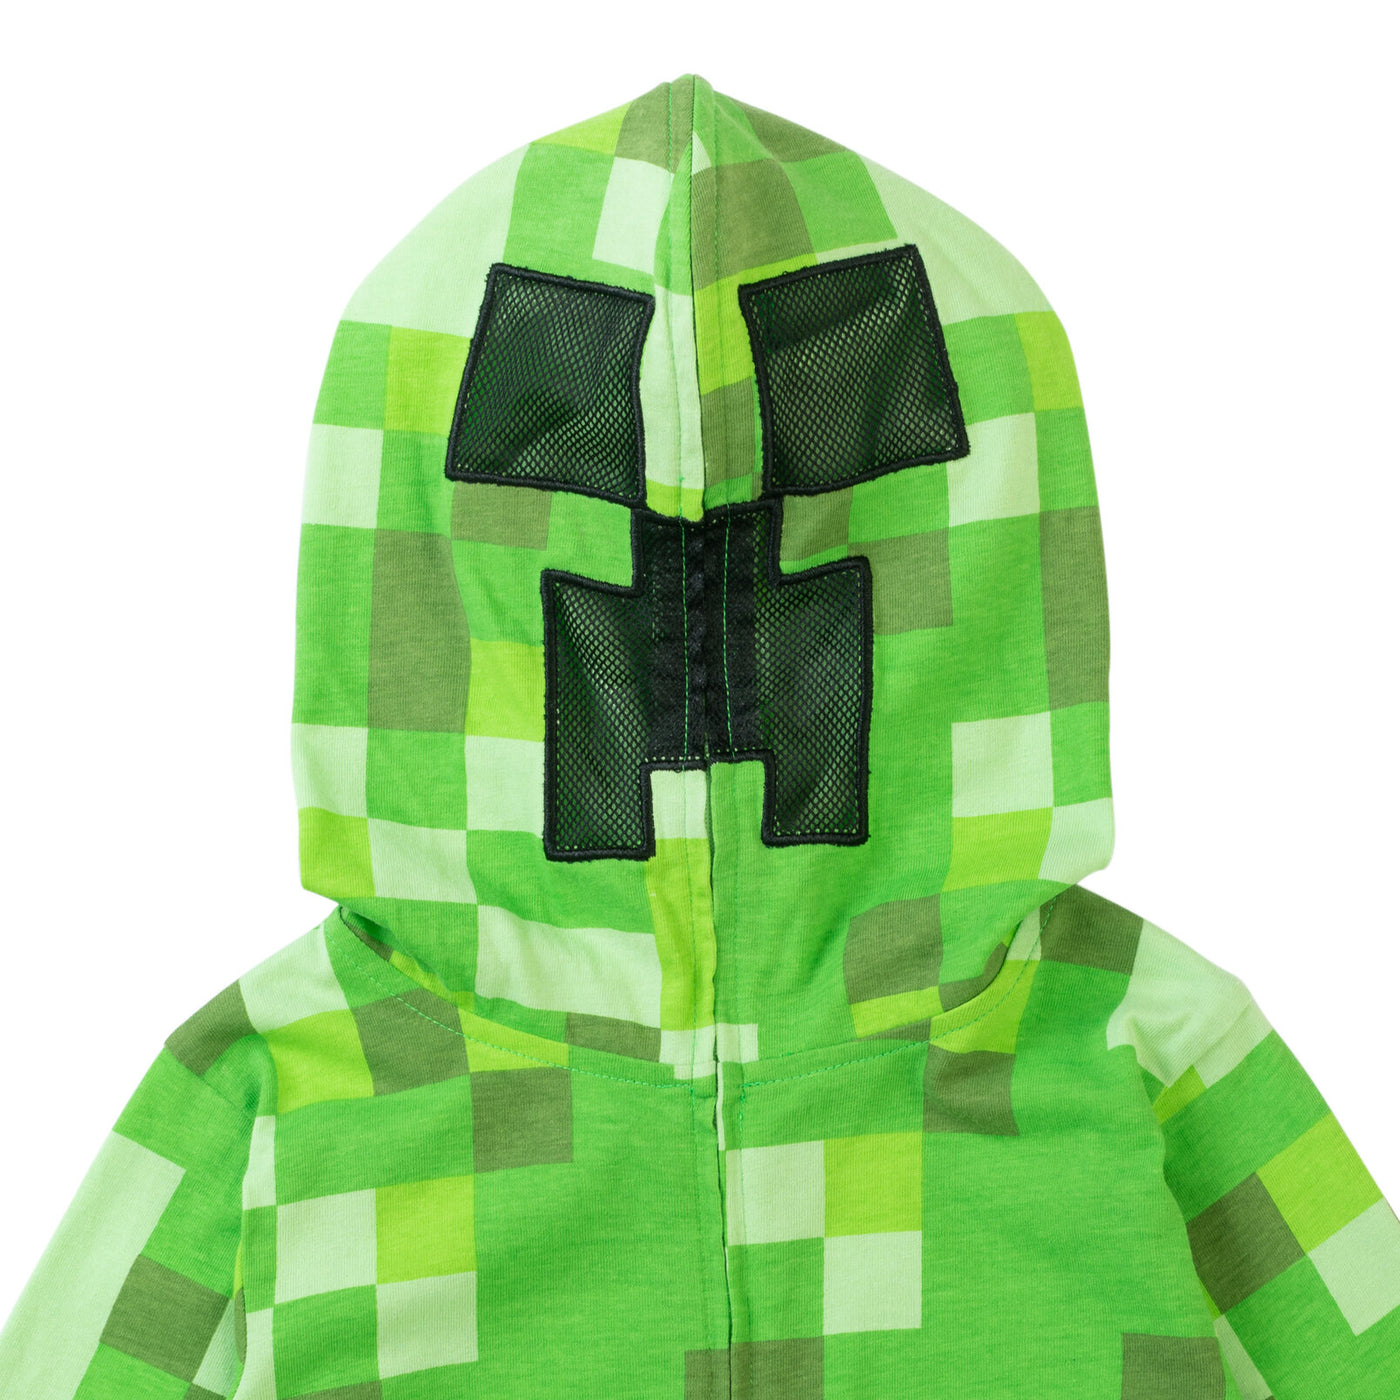 Minecraft Youth Large Green Creeper Suit Zip Up Hoodie